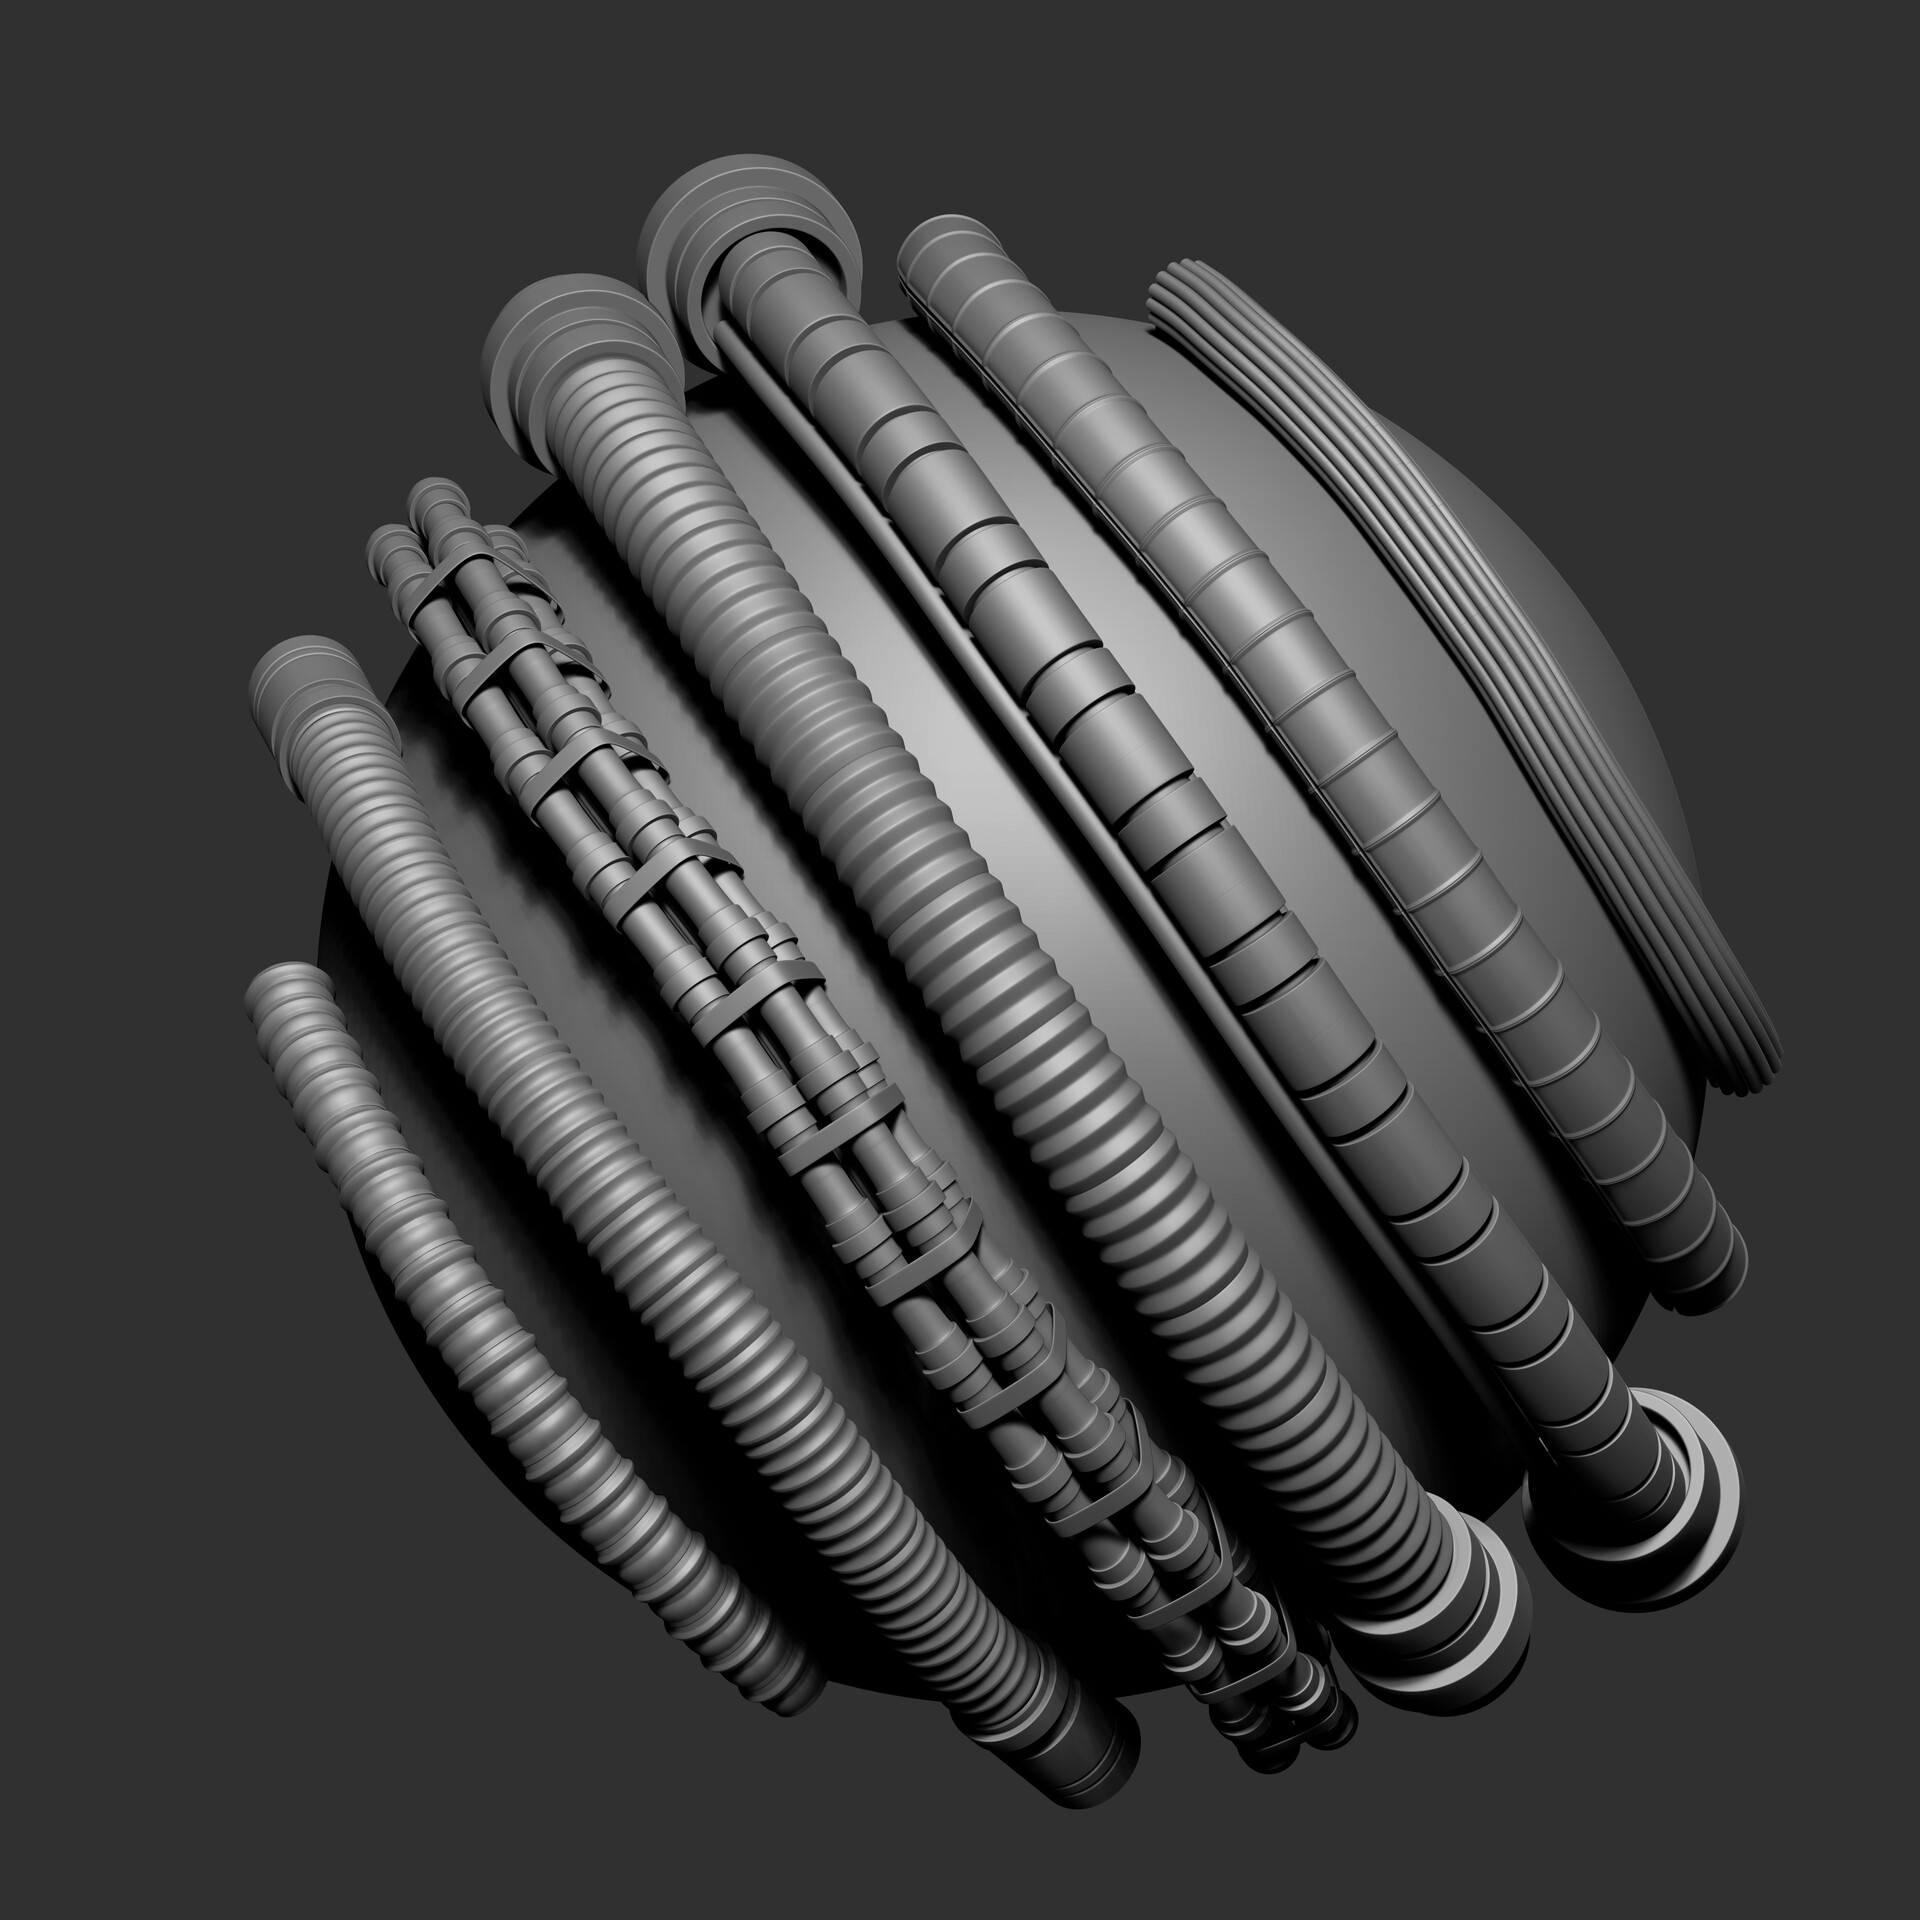 cable & wire zbrush imm brushes